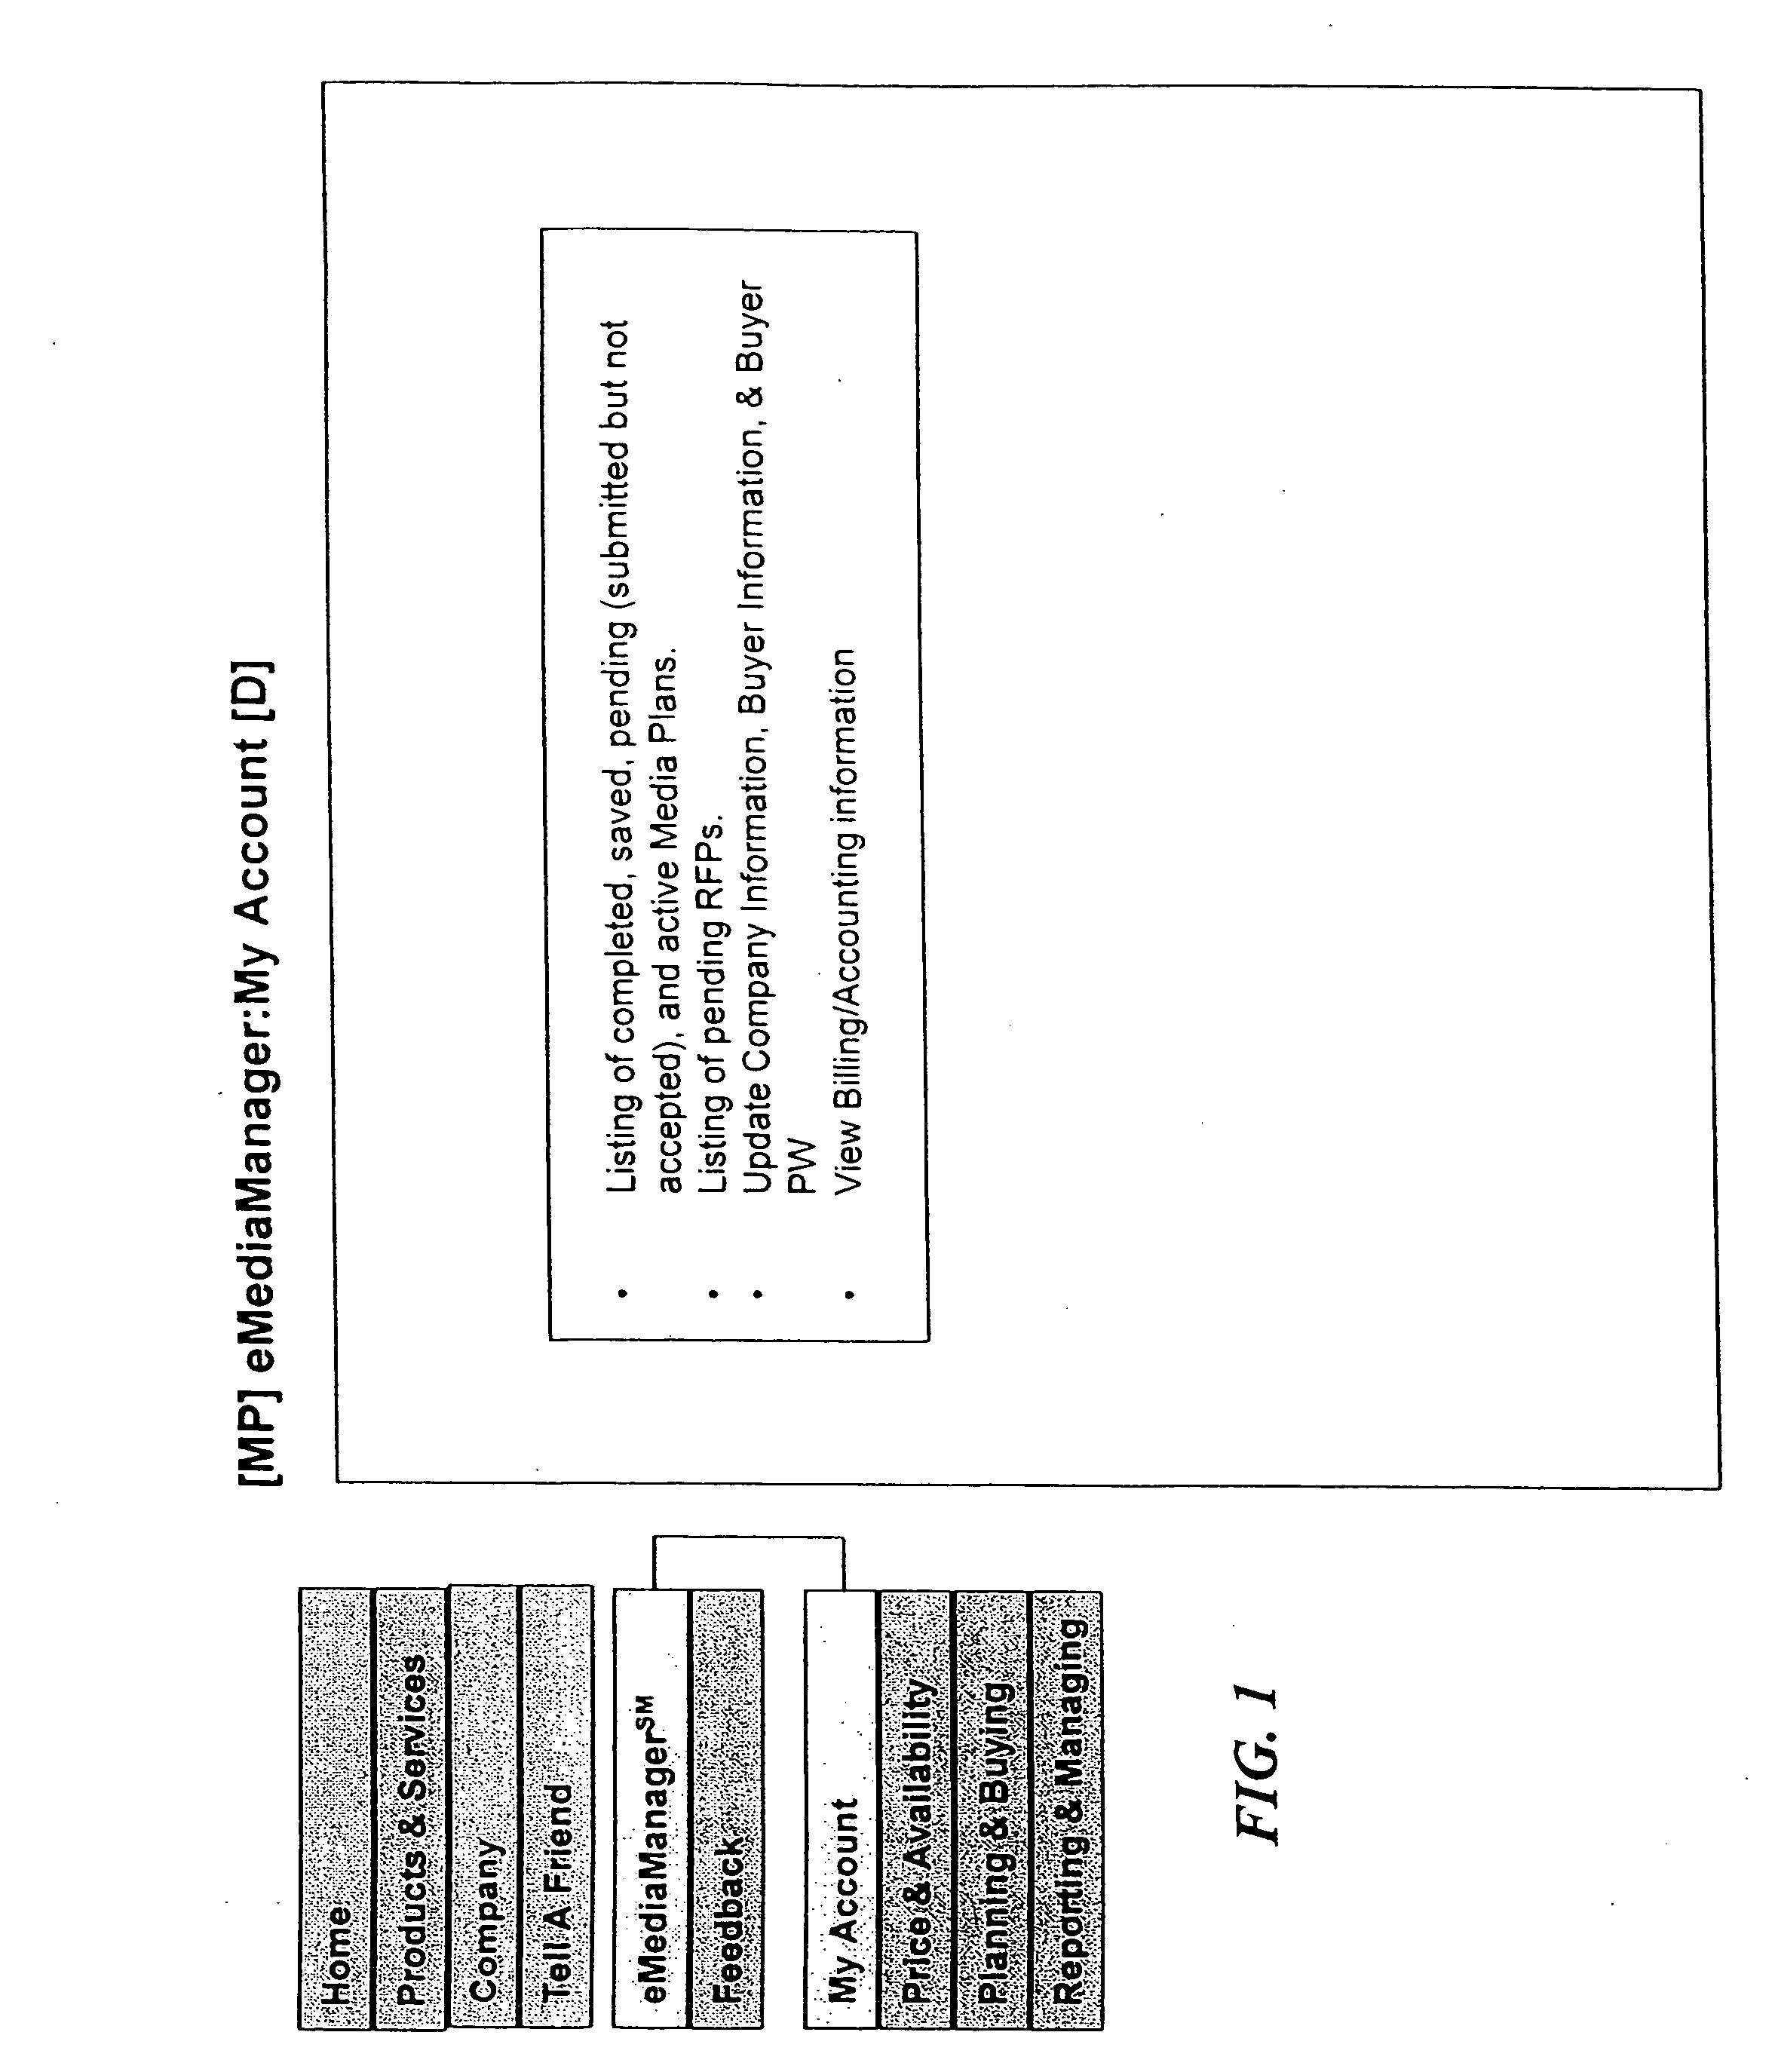 Interactive media management system and method for network applications